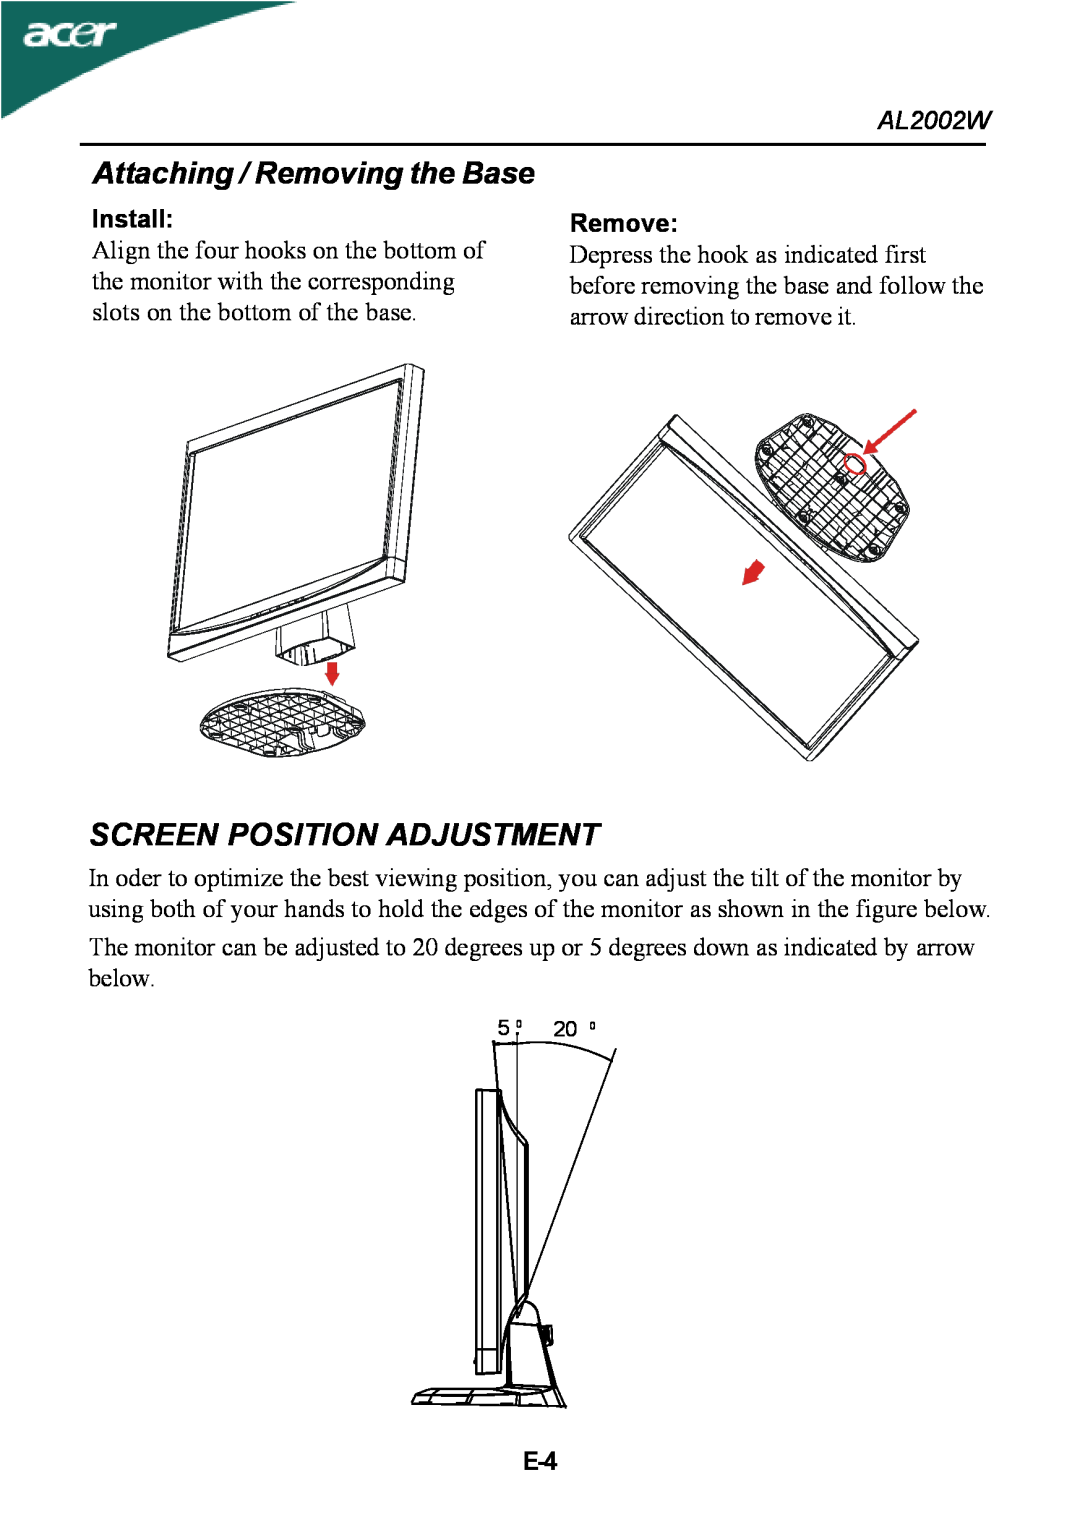 Acer al200 user manual Attaching / Removing the Base, Screen Position Adjustment, Install, AL2002W, Remove 